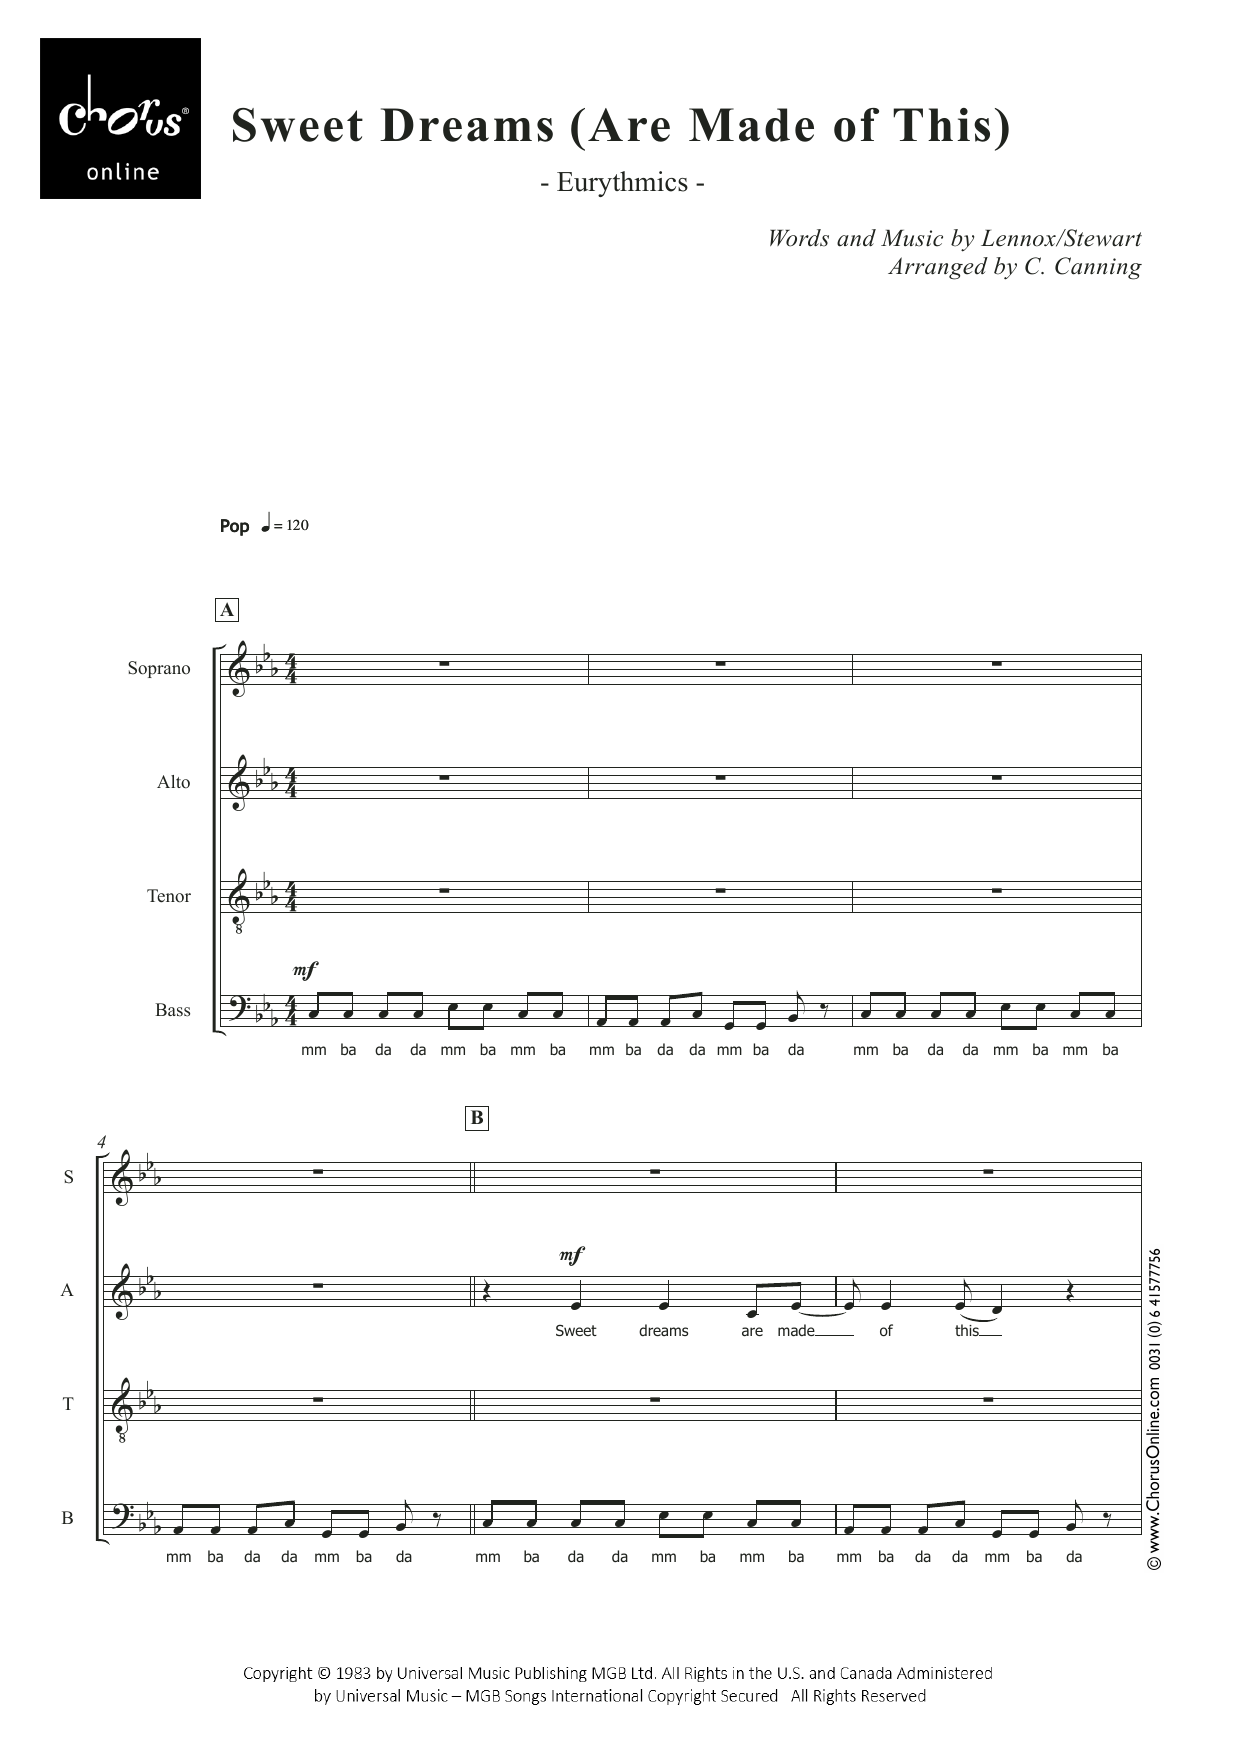 Eurythmics Sweet Dreams (Are Made of This) (arr. Carol Canning) sheet music notes printable PDF score